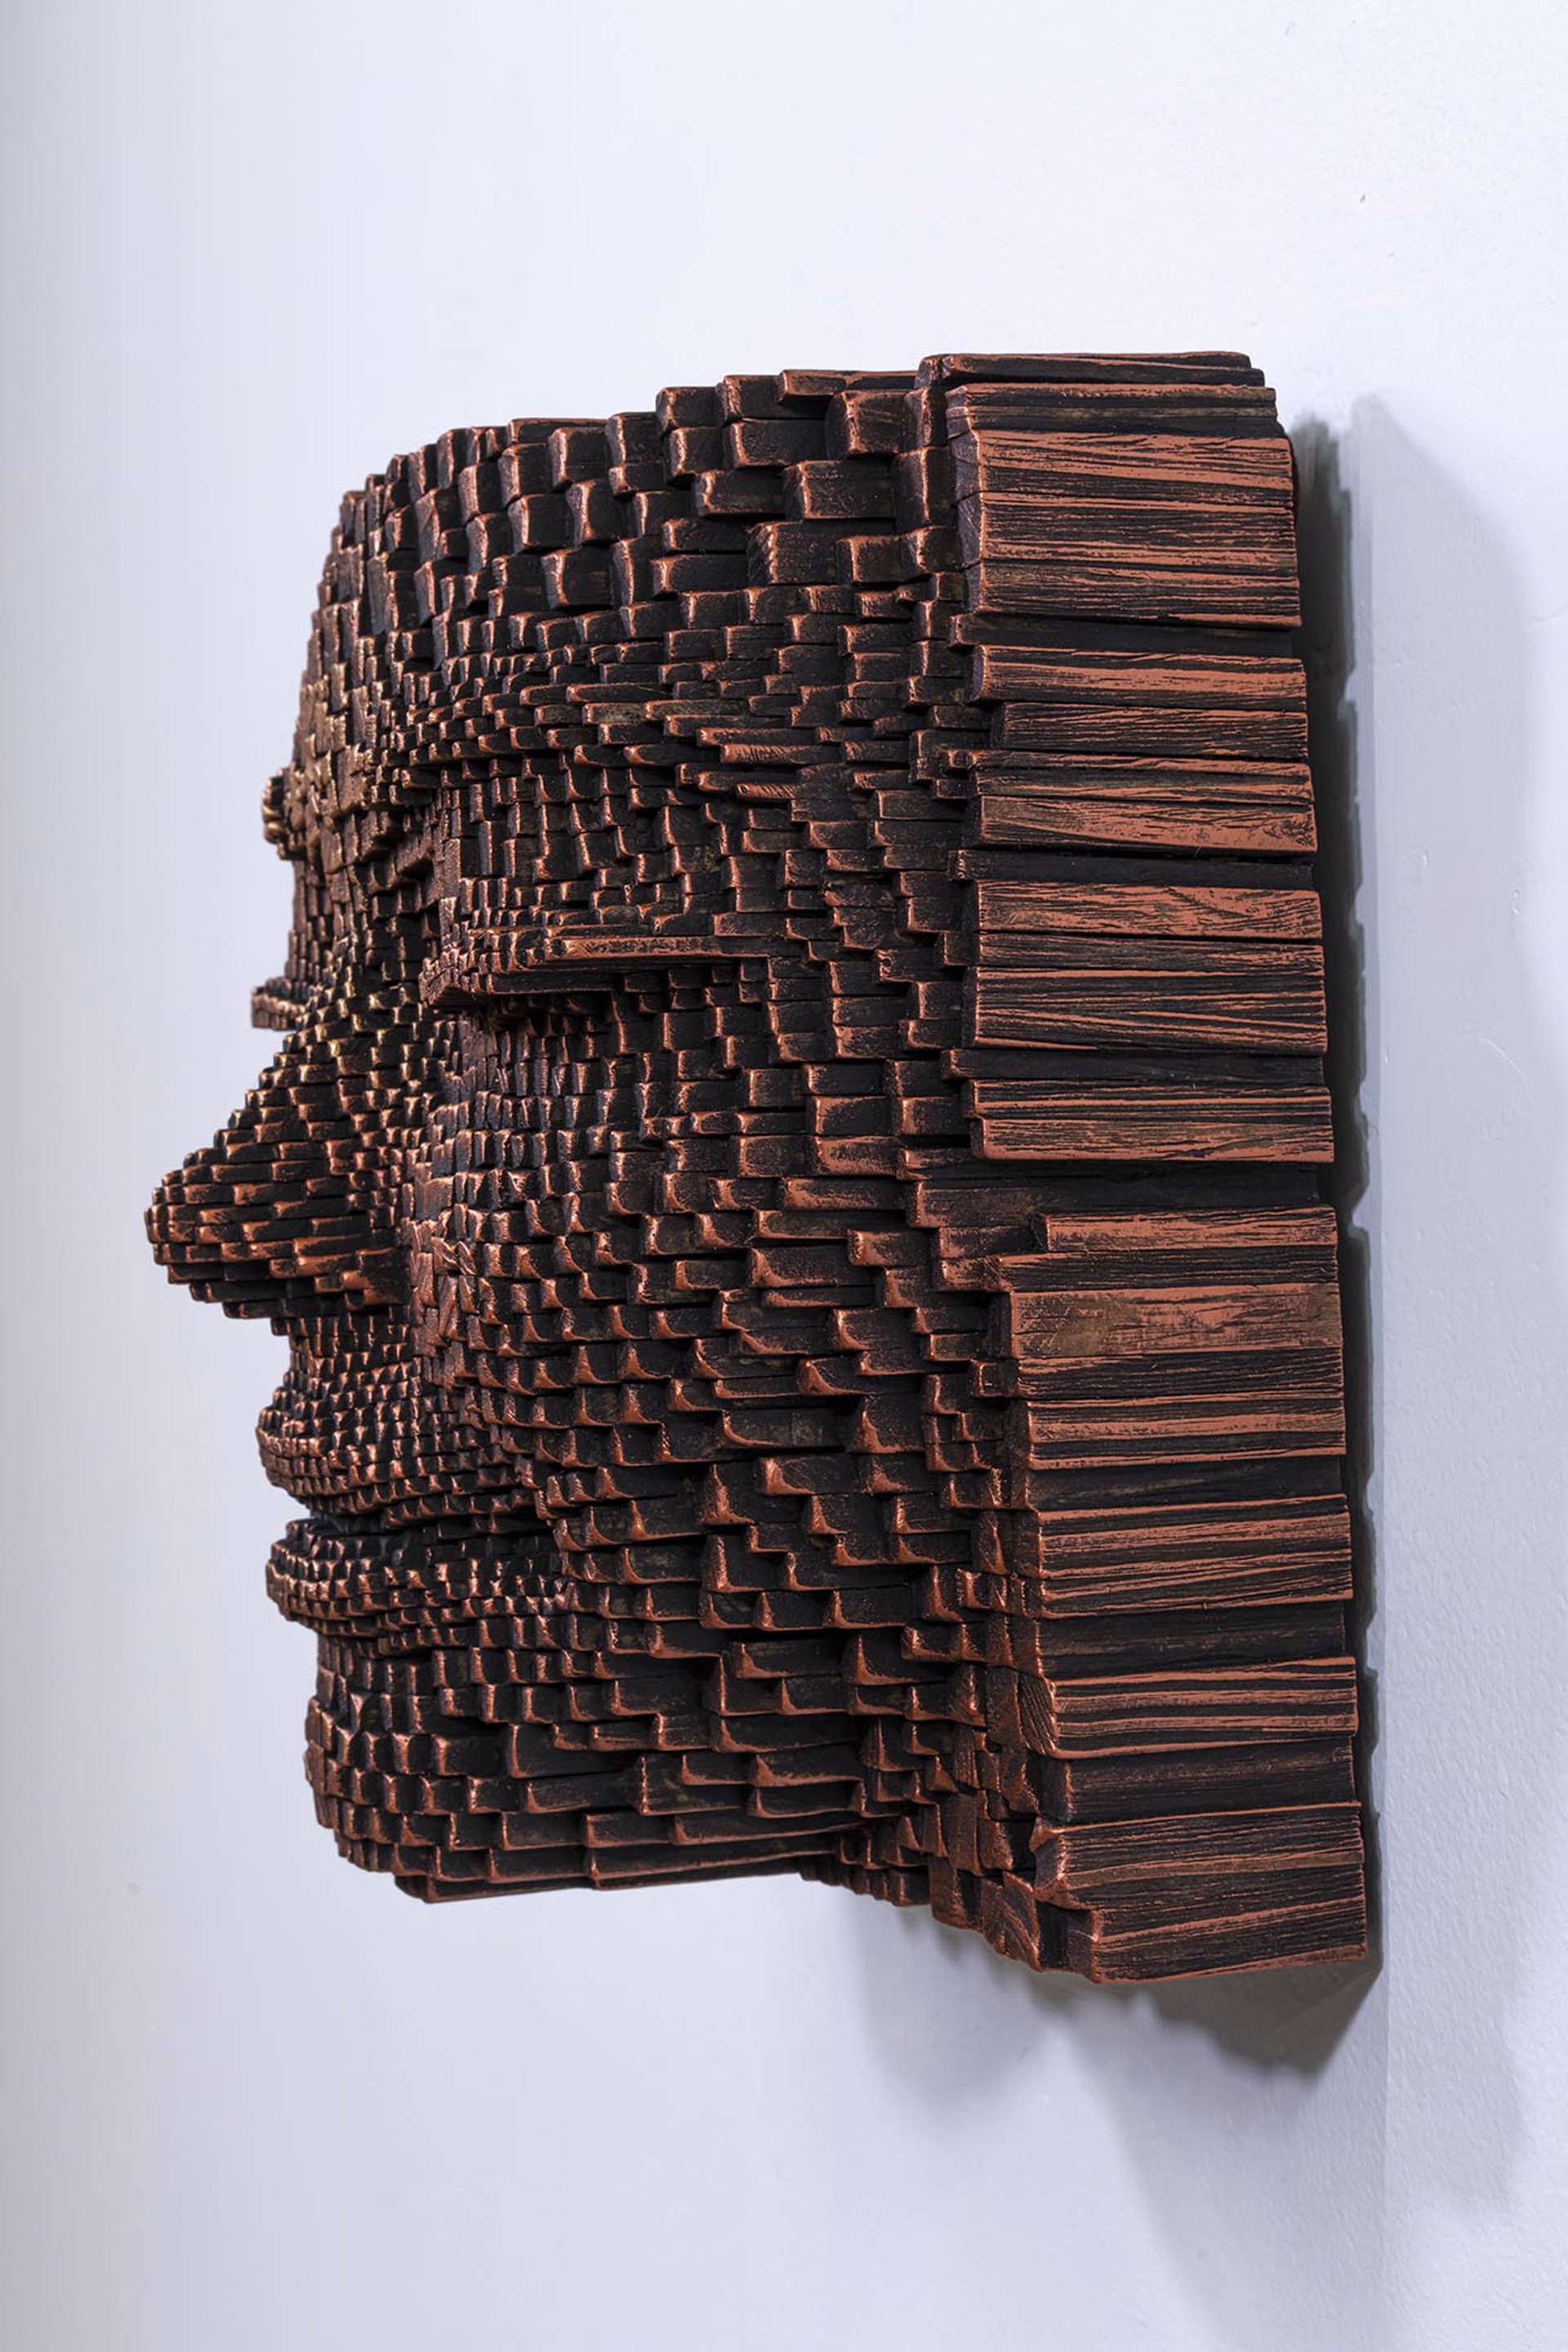 Mask #280 by Gil Bruvel